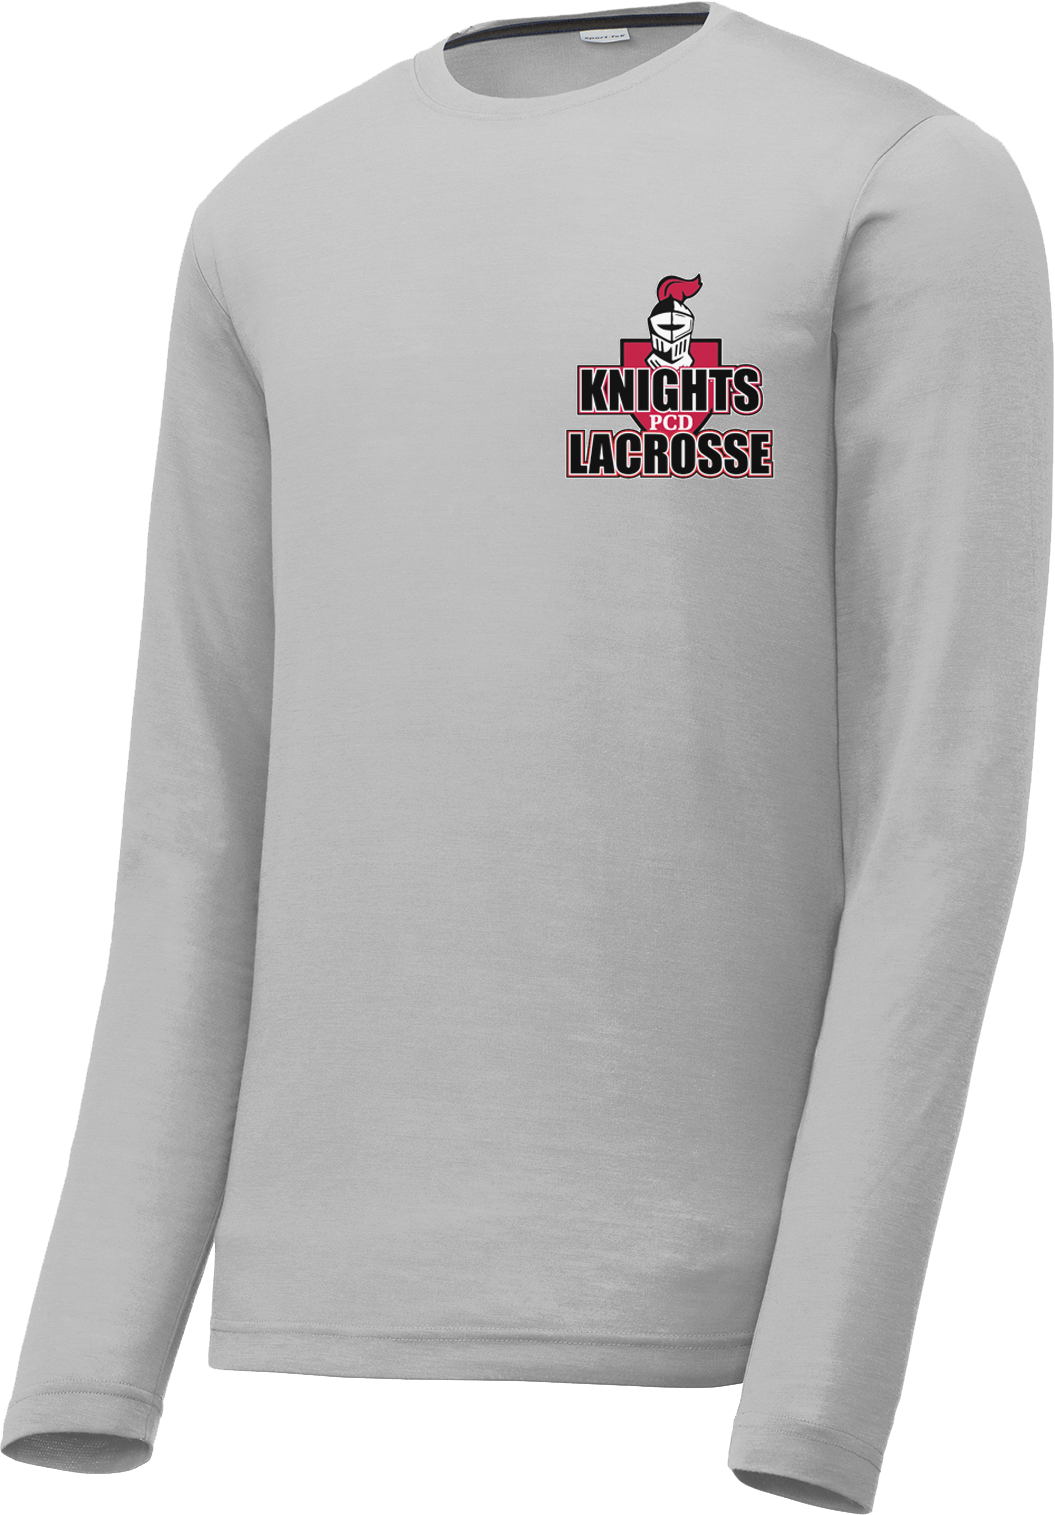 PCD Lacrosse Long Sleeve CottonTouch Performance Shirt